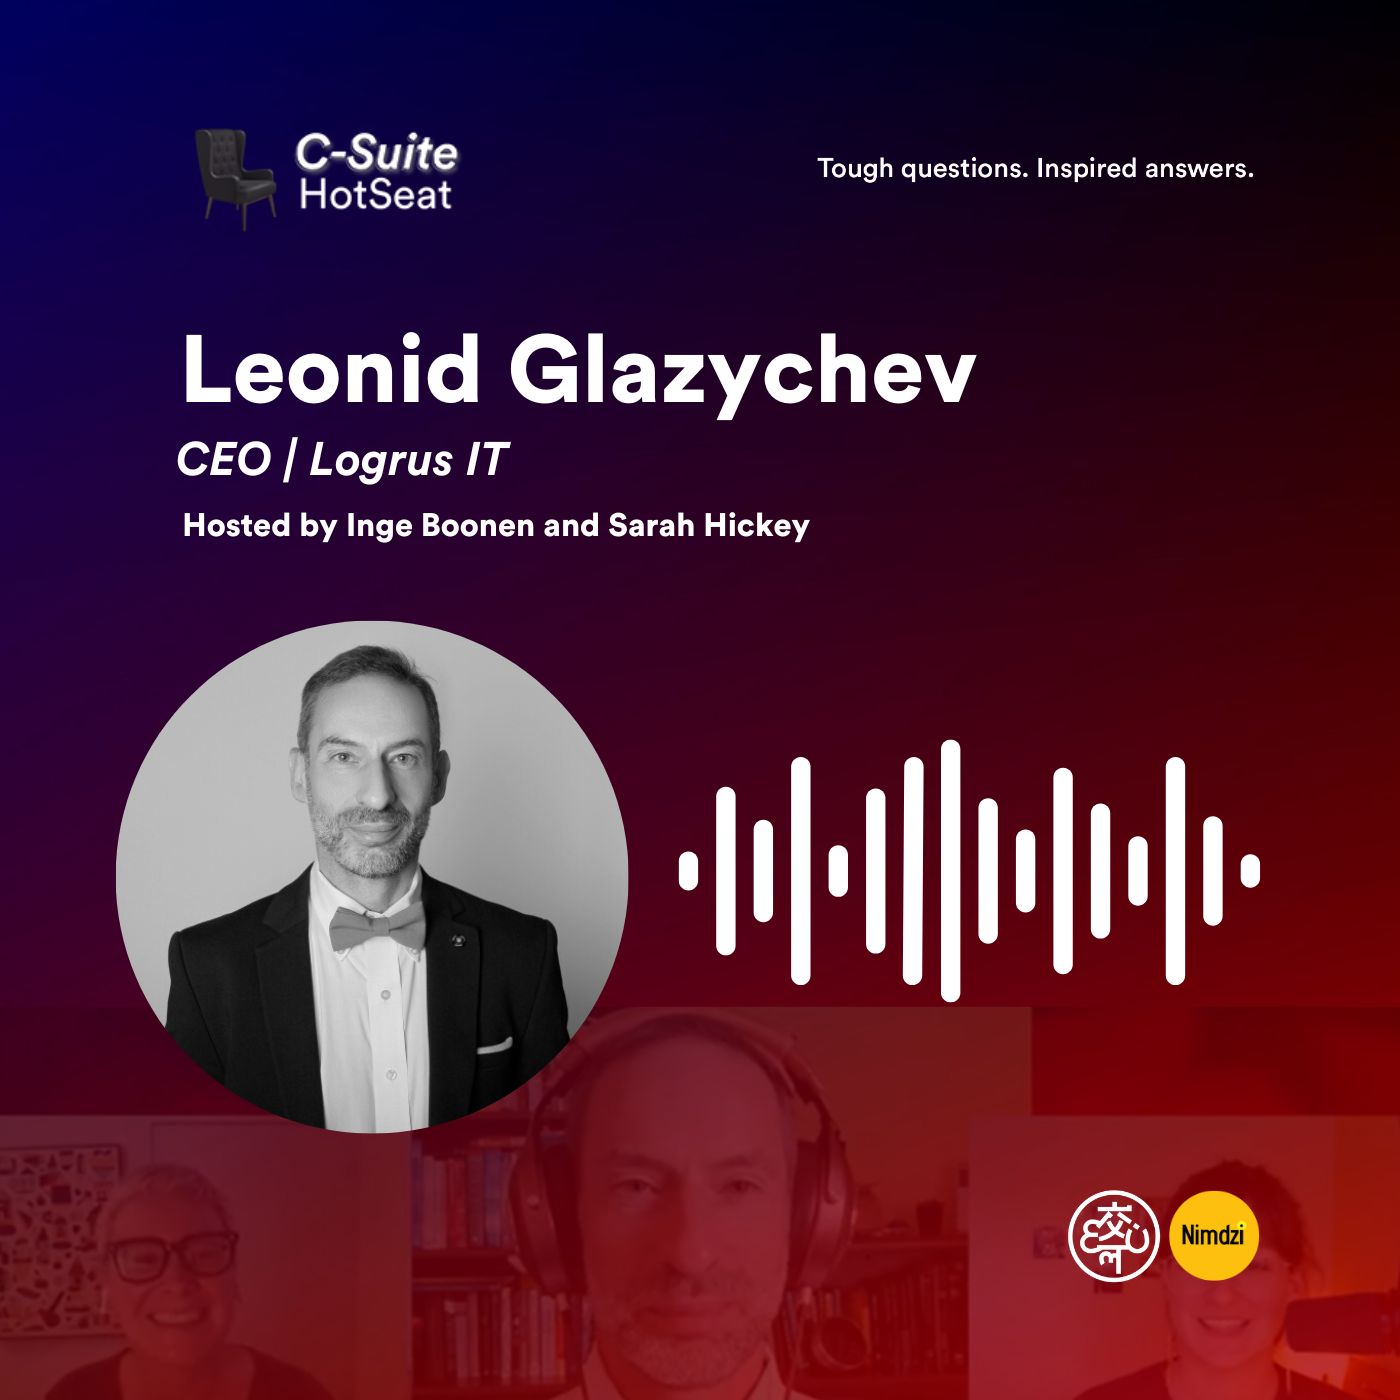 Try to start at the top with Leonid Glazychev, CEO of Logrus IT | C-Suite HotSeat E35